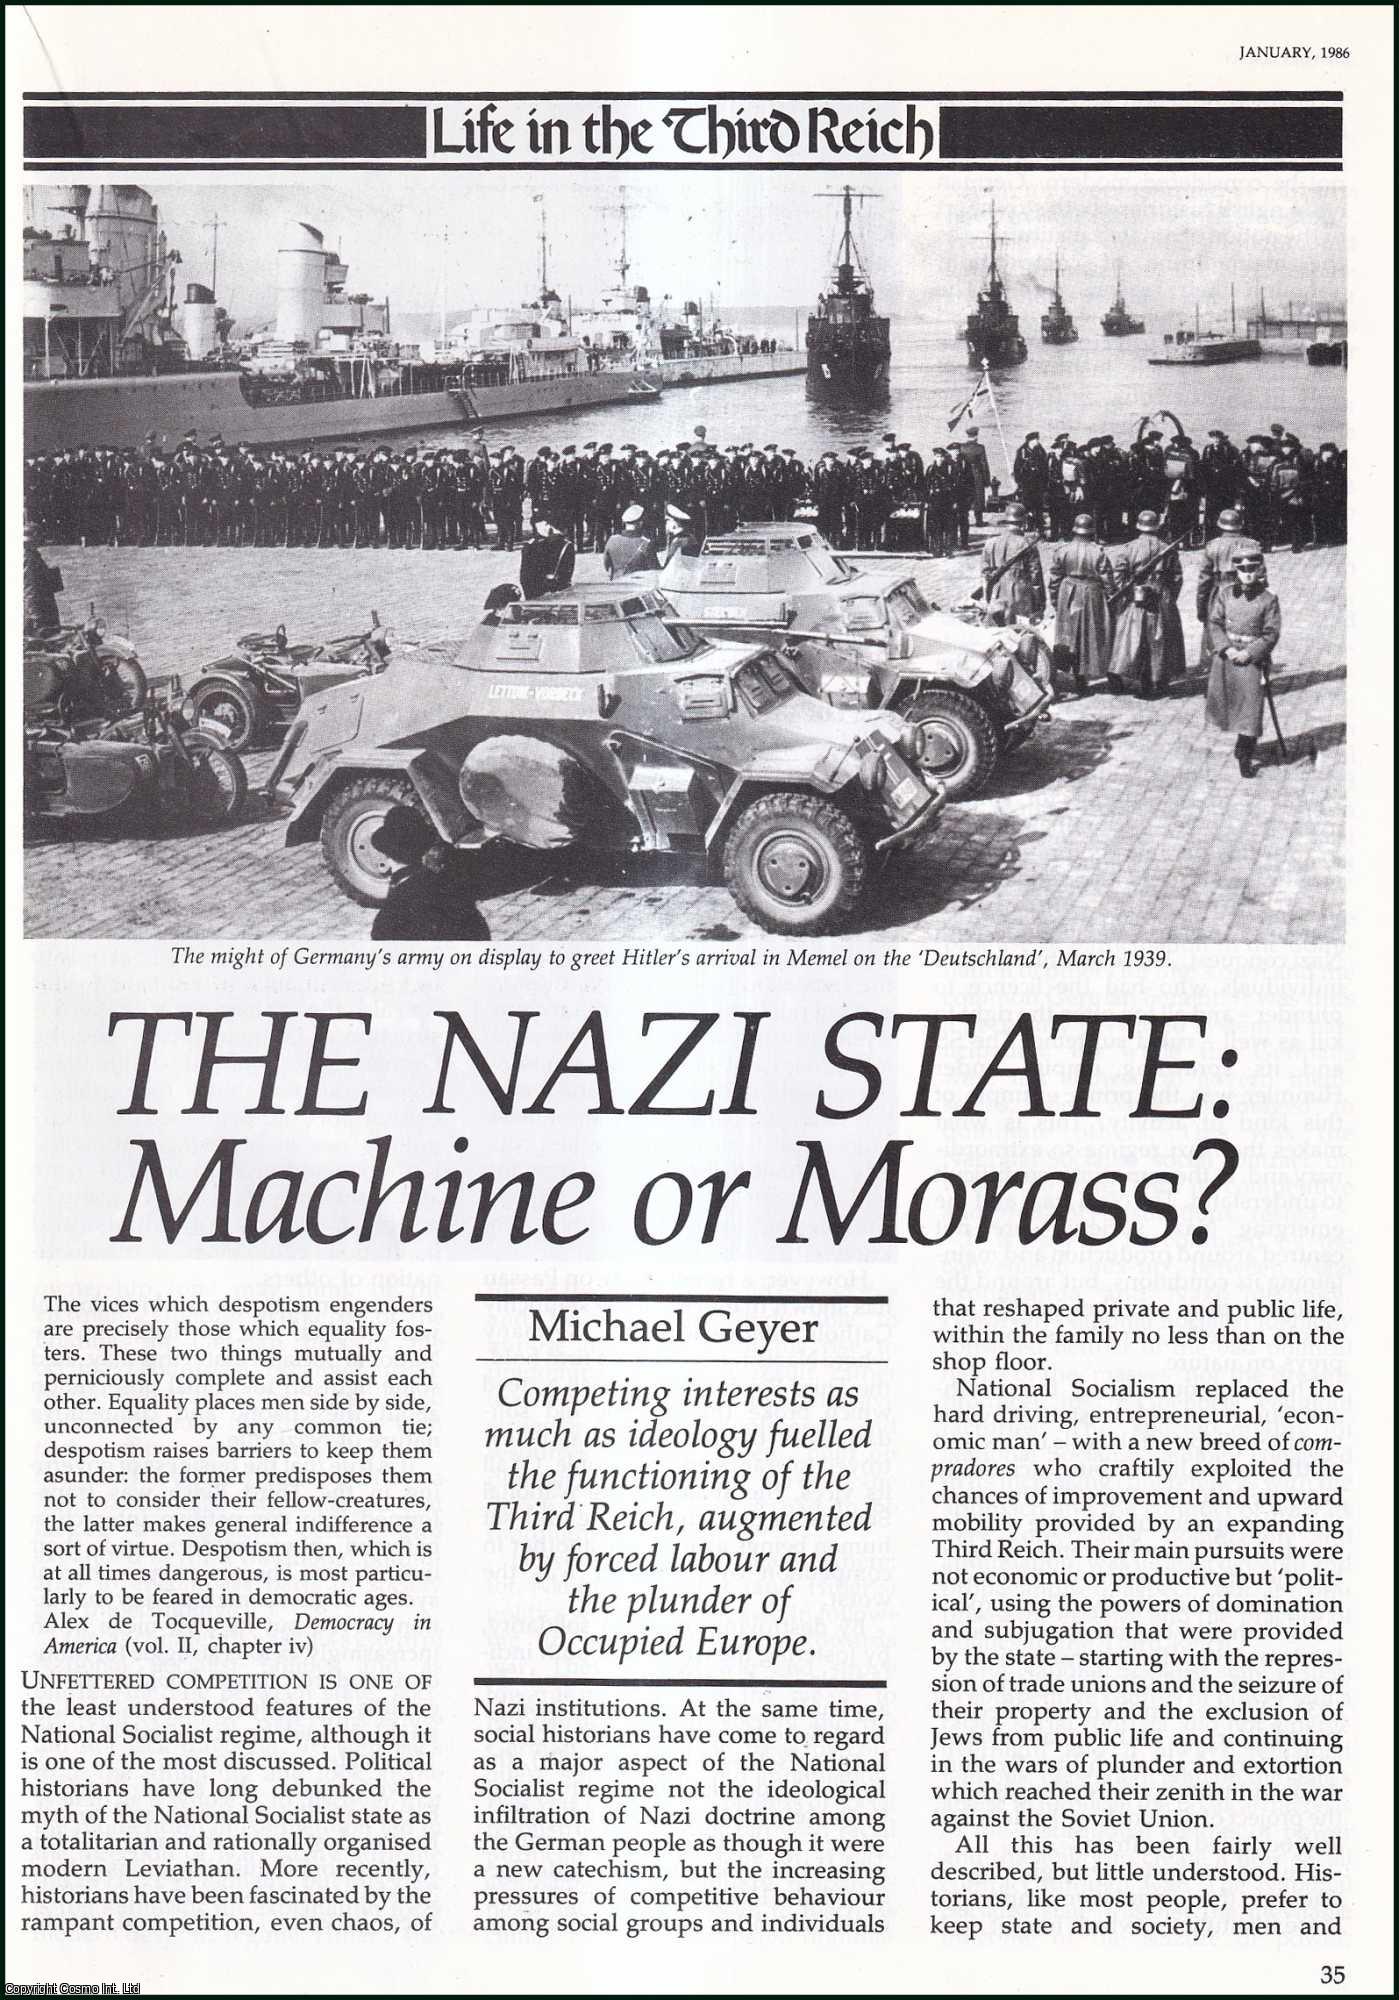 Michael Geyer - The Nazi State: Machine or Morass? An original article from History Today, 1986.